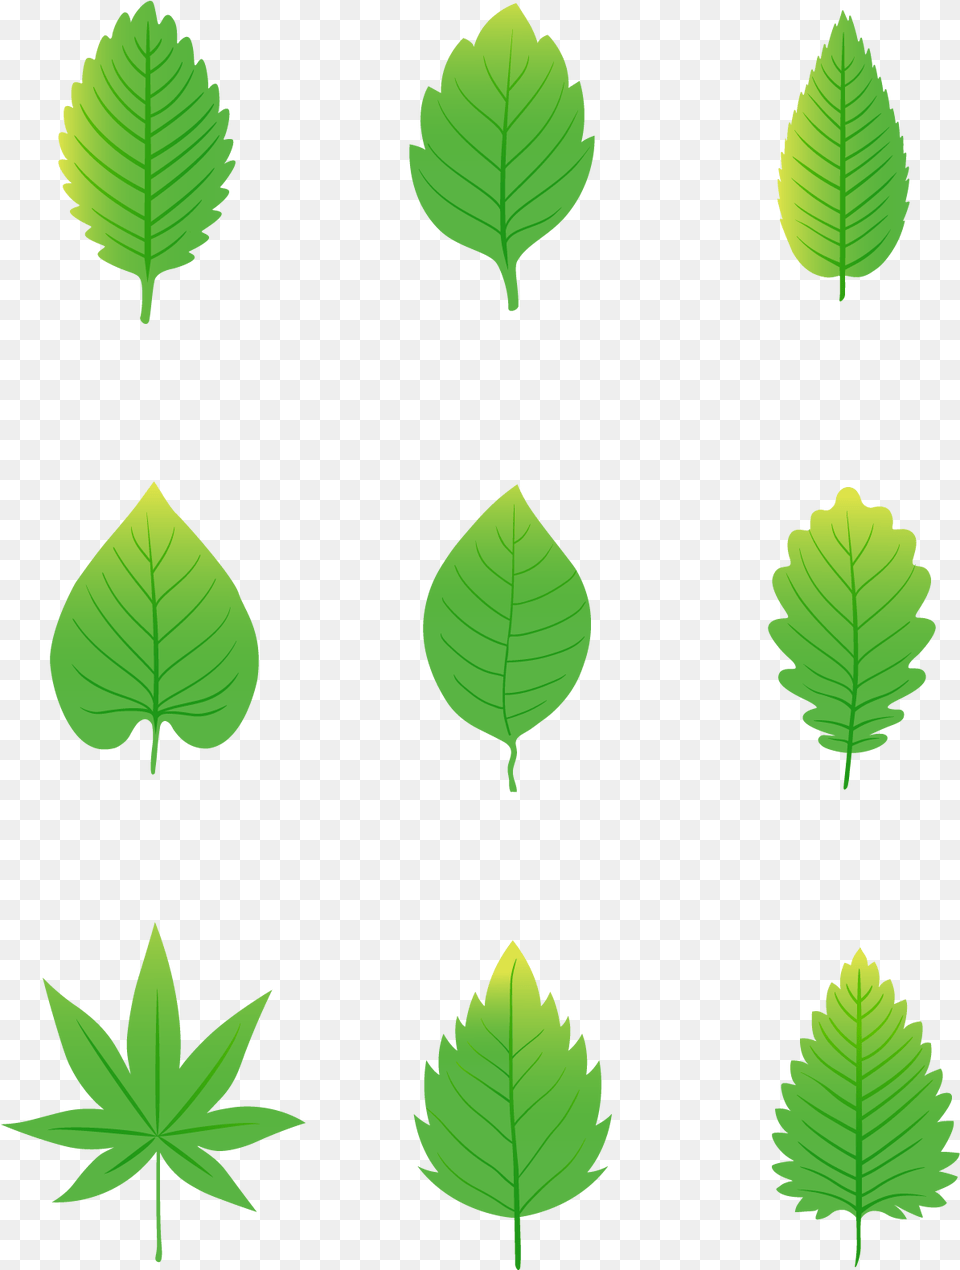 Simplicity Cartoon Green Leaves Elements And Vector Clip Art, Leaf, Plant, Tree, Vegetation Free Transparent Png